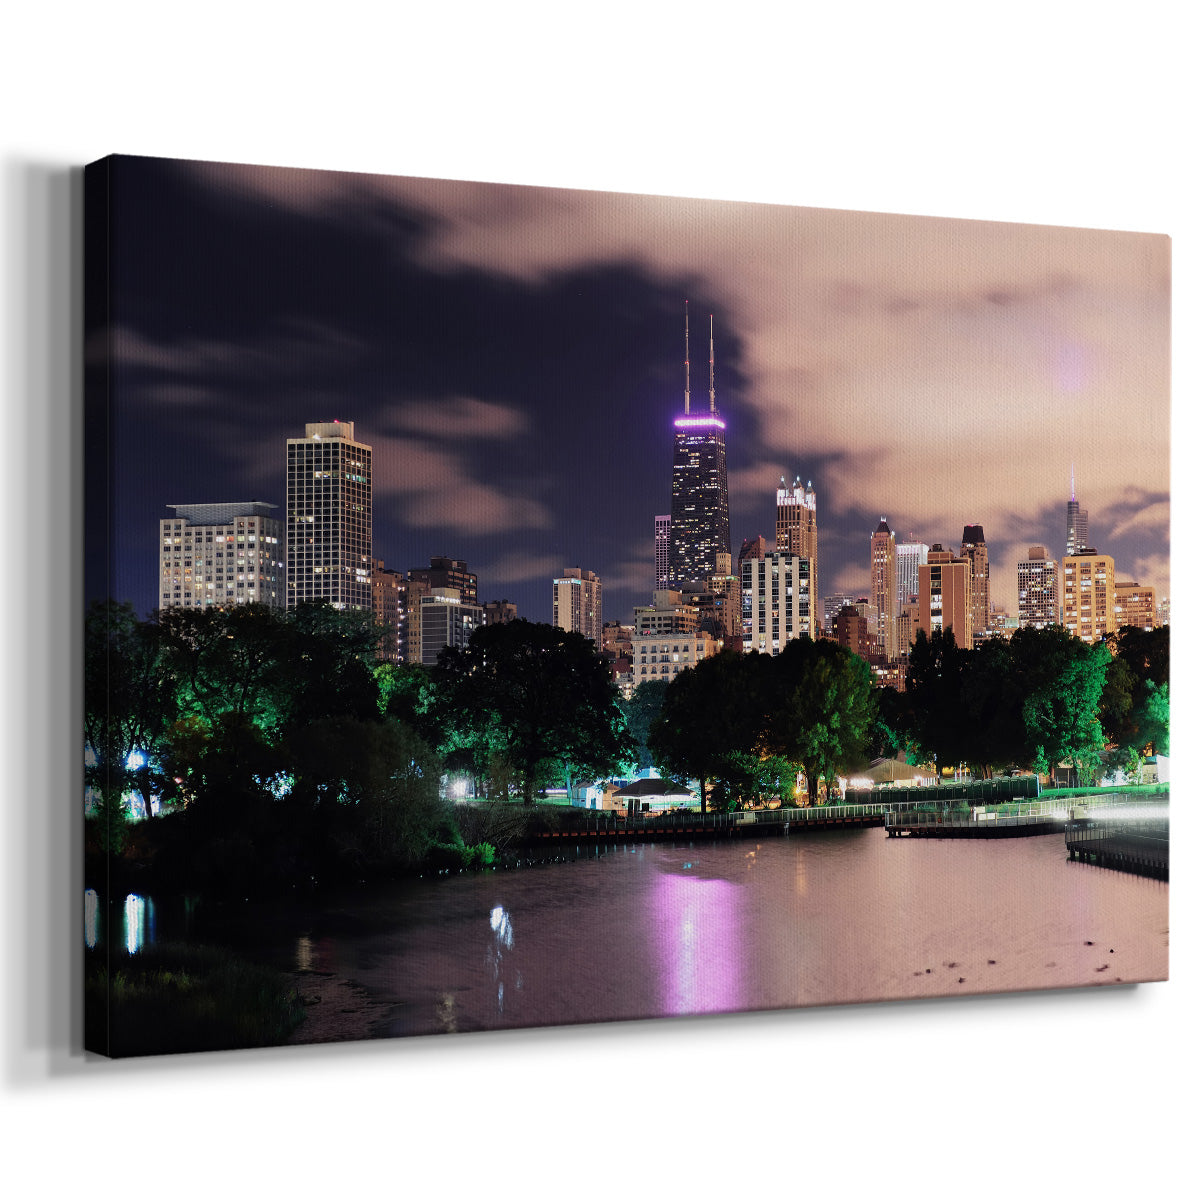 Chicago Park at Night - Gallery Wrapped Canvas